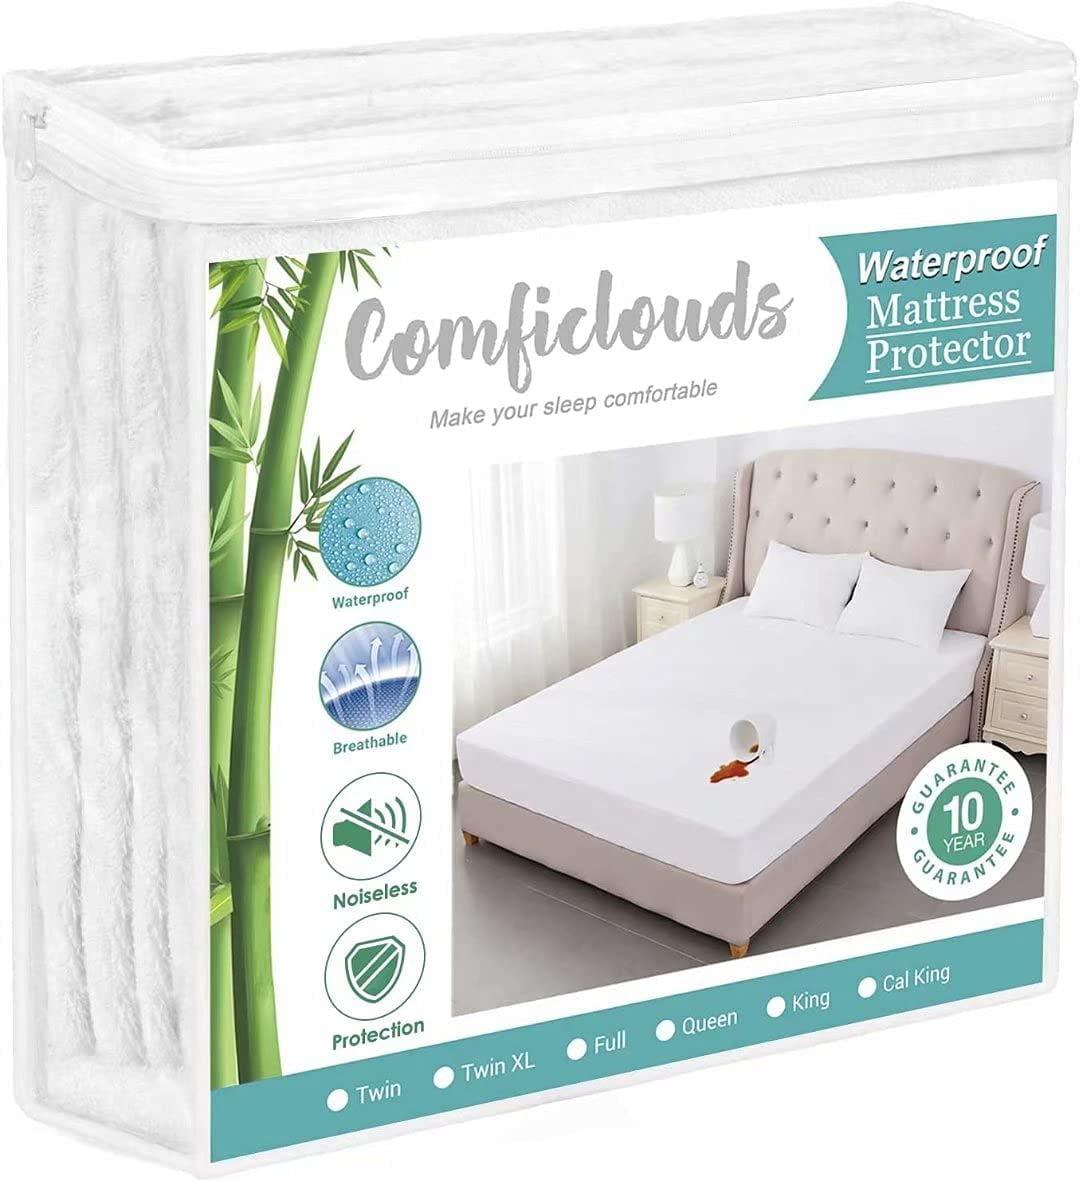 Deep 30 cm box Soft Terry Towel Waterproof Mattress Protector  Bed Cover Sizes 